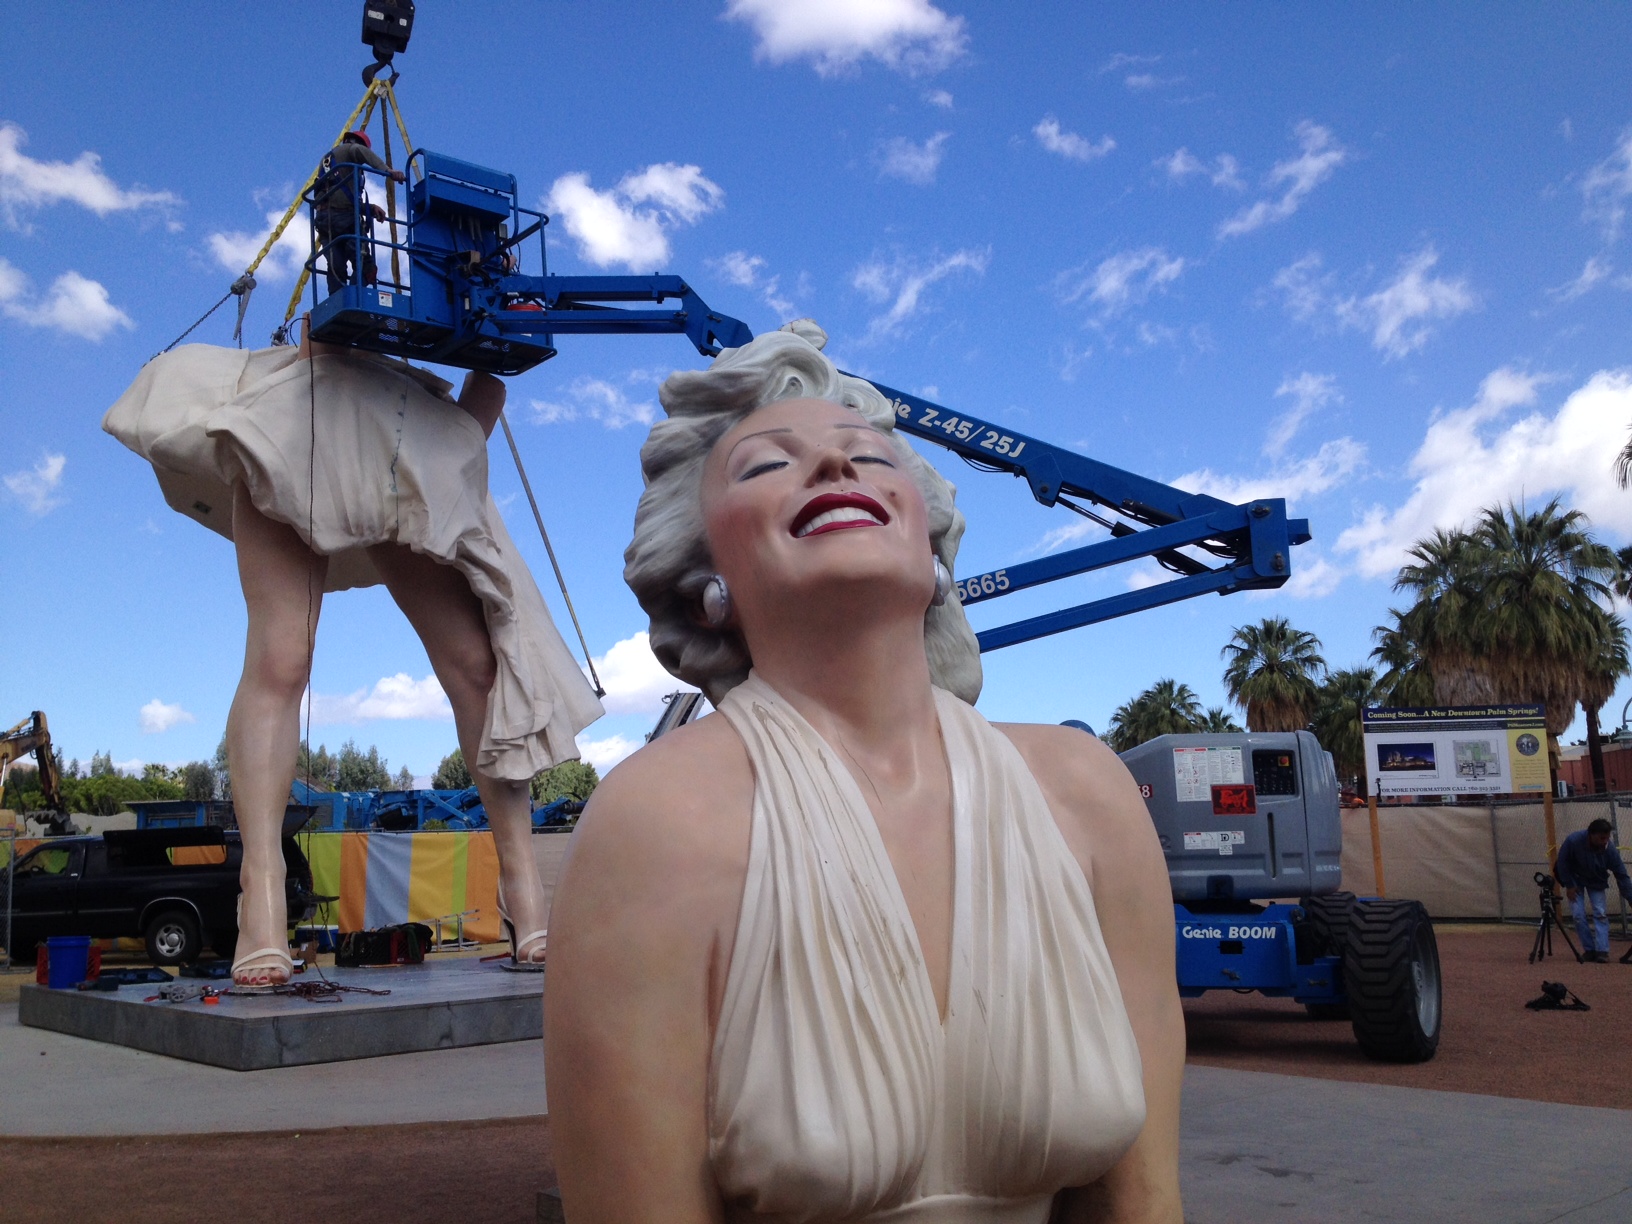 A Giant Statue of Marilyn Monroe Will Be Installed in Front of the